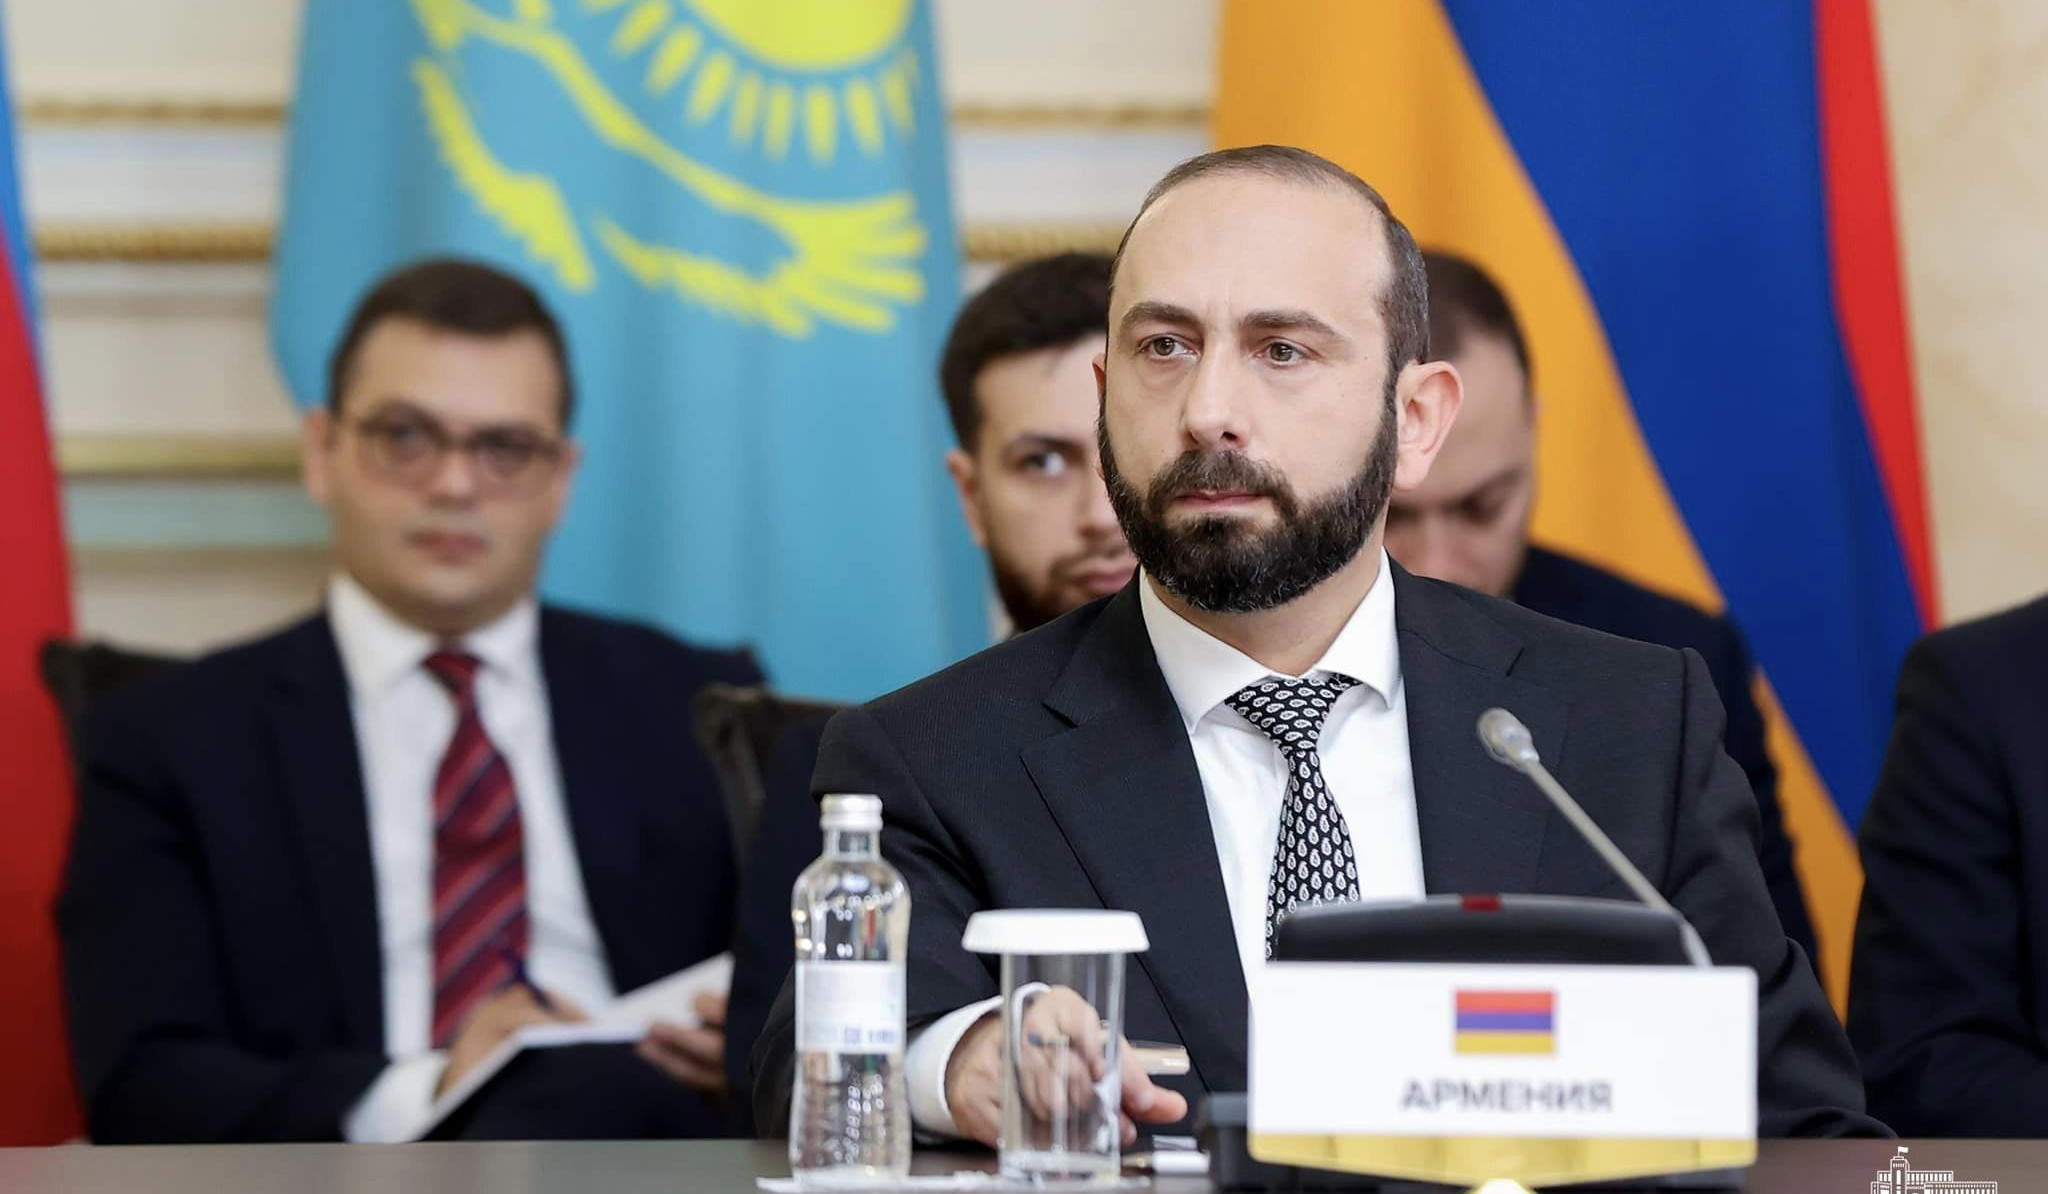 Remarks by Foreign Minister of Armenia at the start of negotiations in Almaty